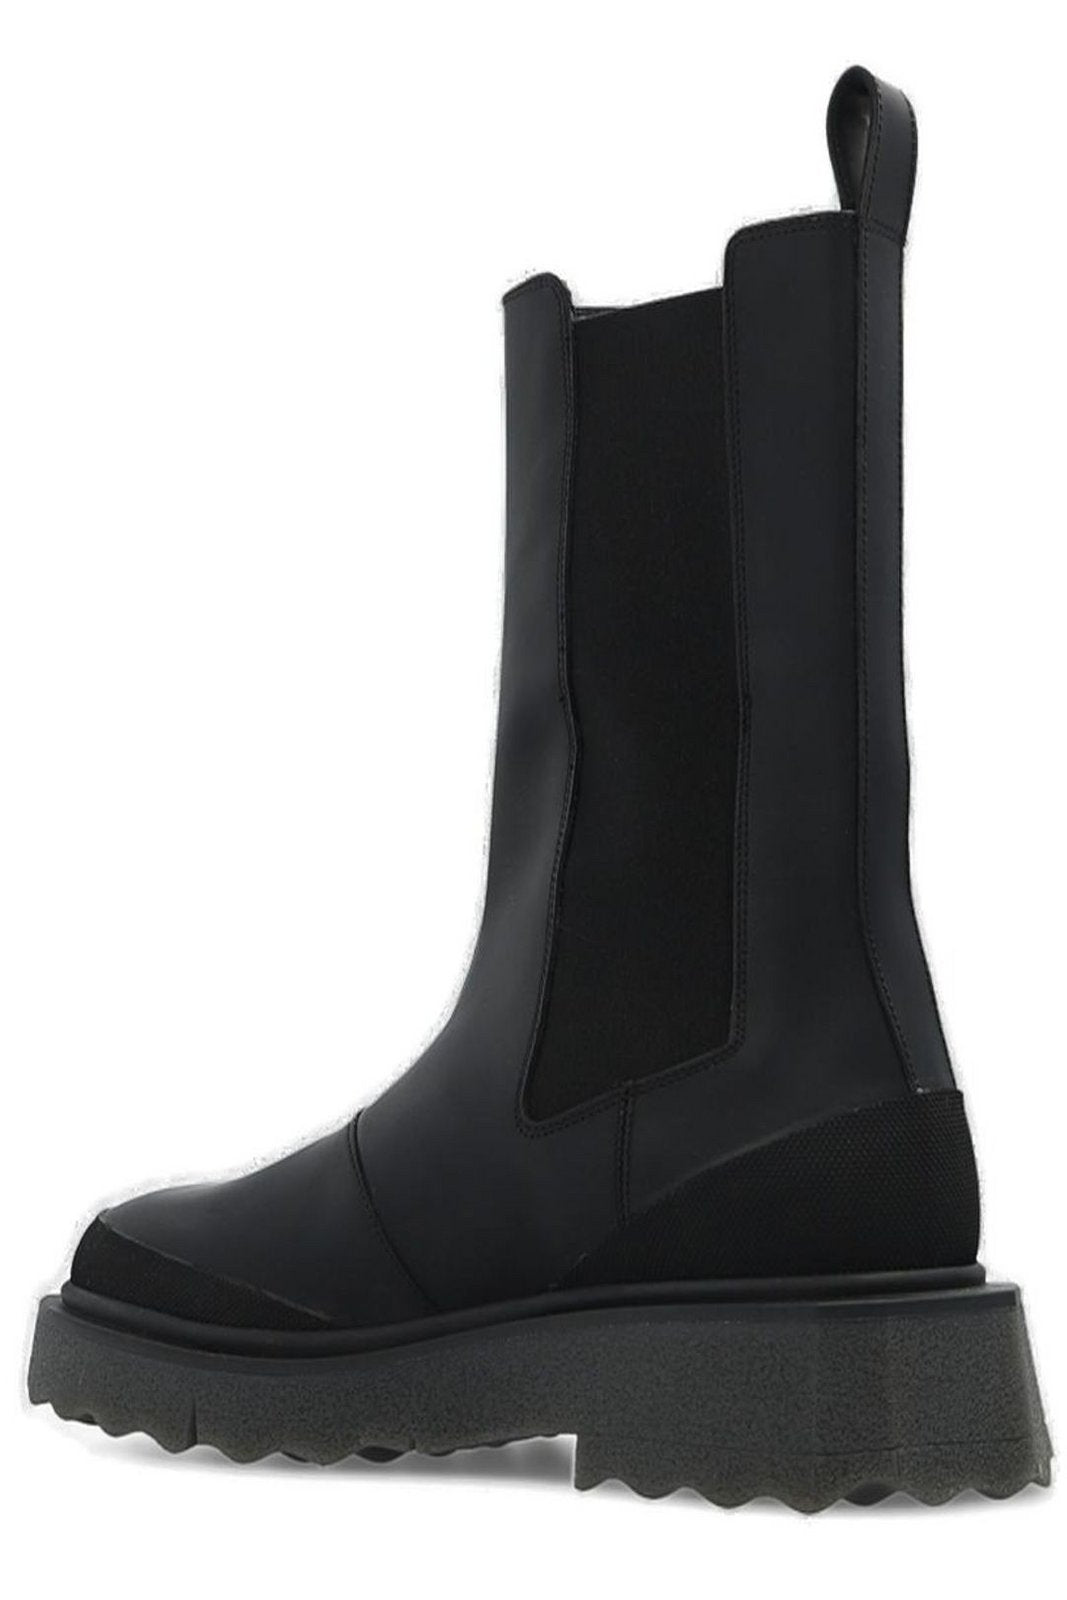 Off-White Round Toe Chelsea Boots